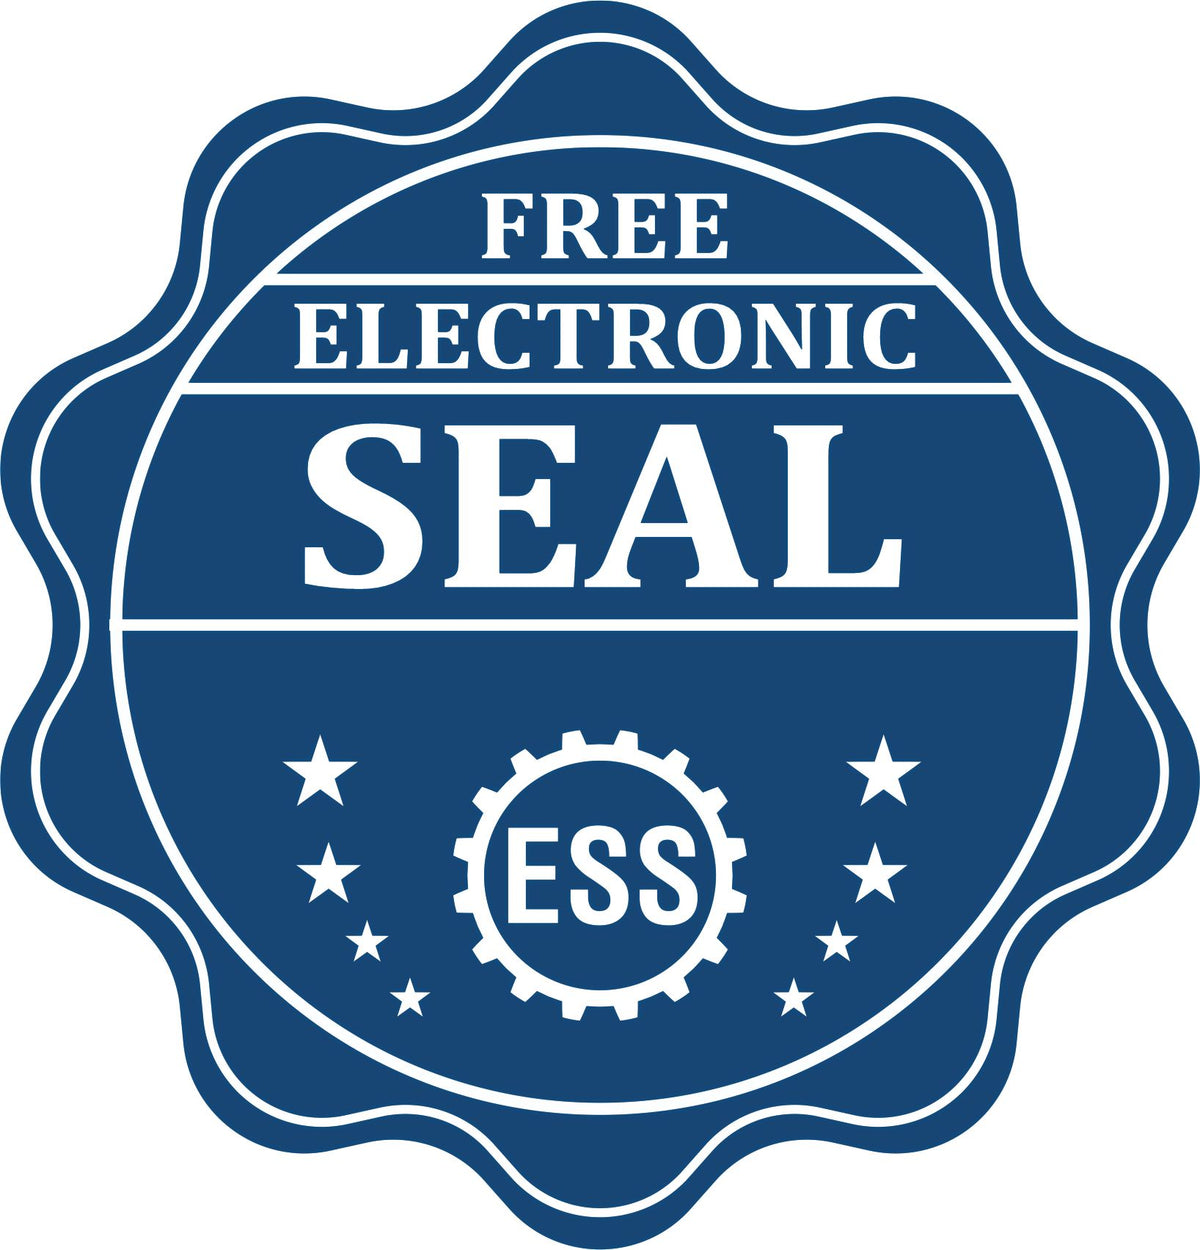 A badge showing a free electronic seal for the State of Hawaii Extended Long Reach Engineer Seal with stars and the ESS gear on the emblem.